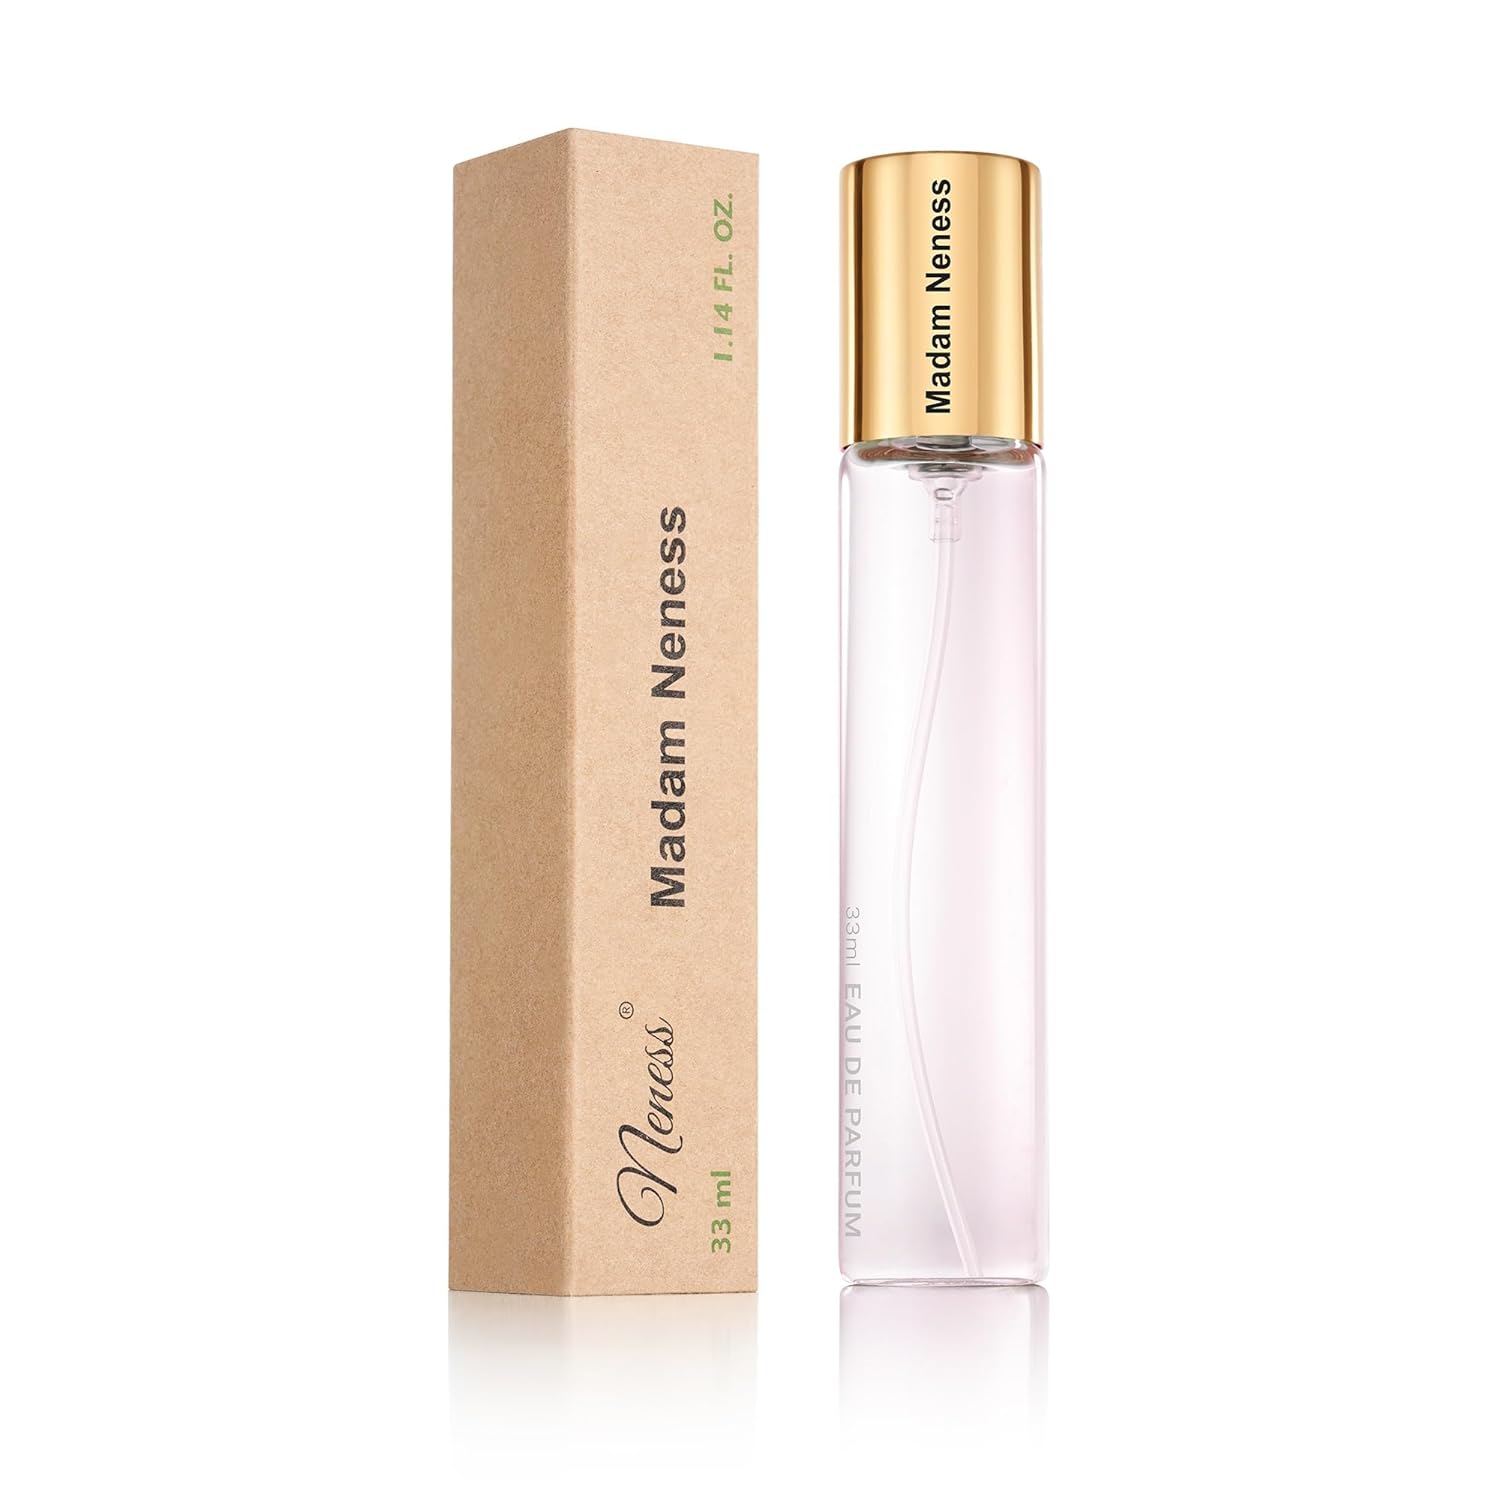 NENESS Madam Eau de Parfum Fragrance for Women Timeless Elegance Subtly Sophisticated Long-Lasting Suitable for Everyday Use and Special Occasions 33 ml - Madam NenessN067. Madam Neness